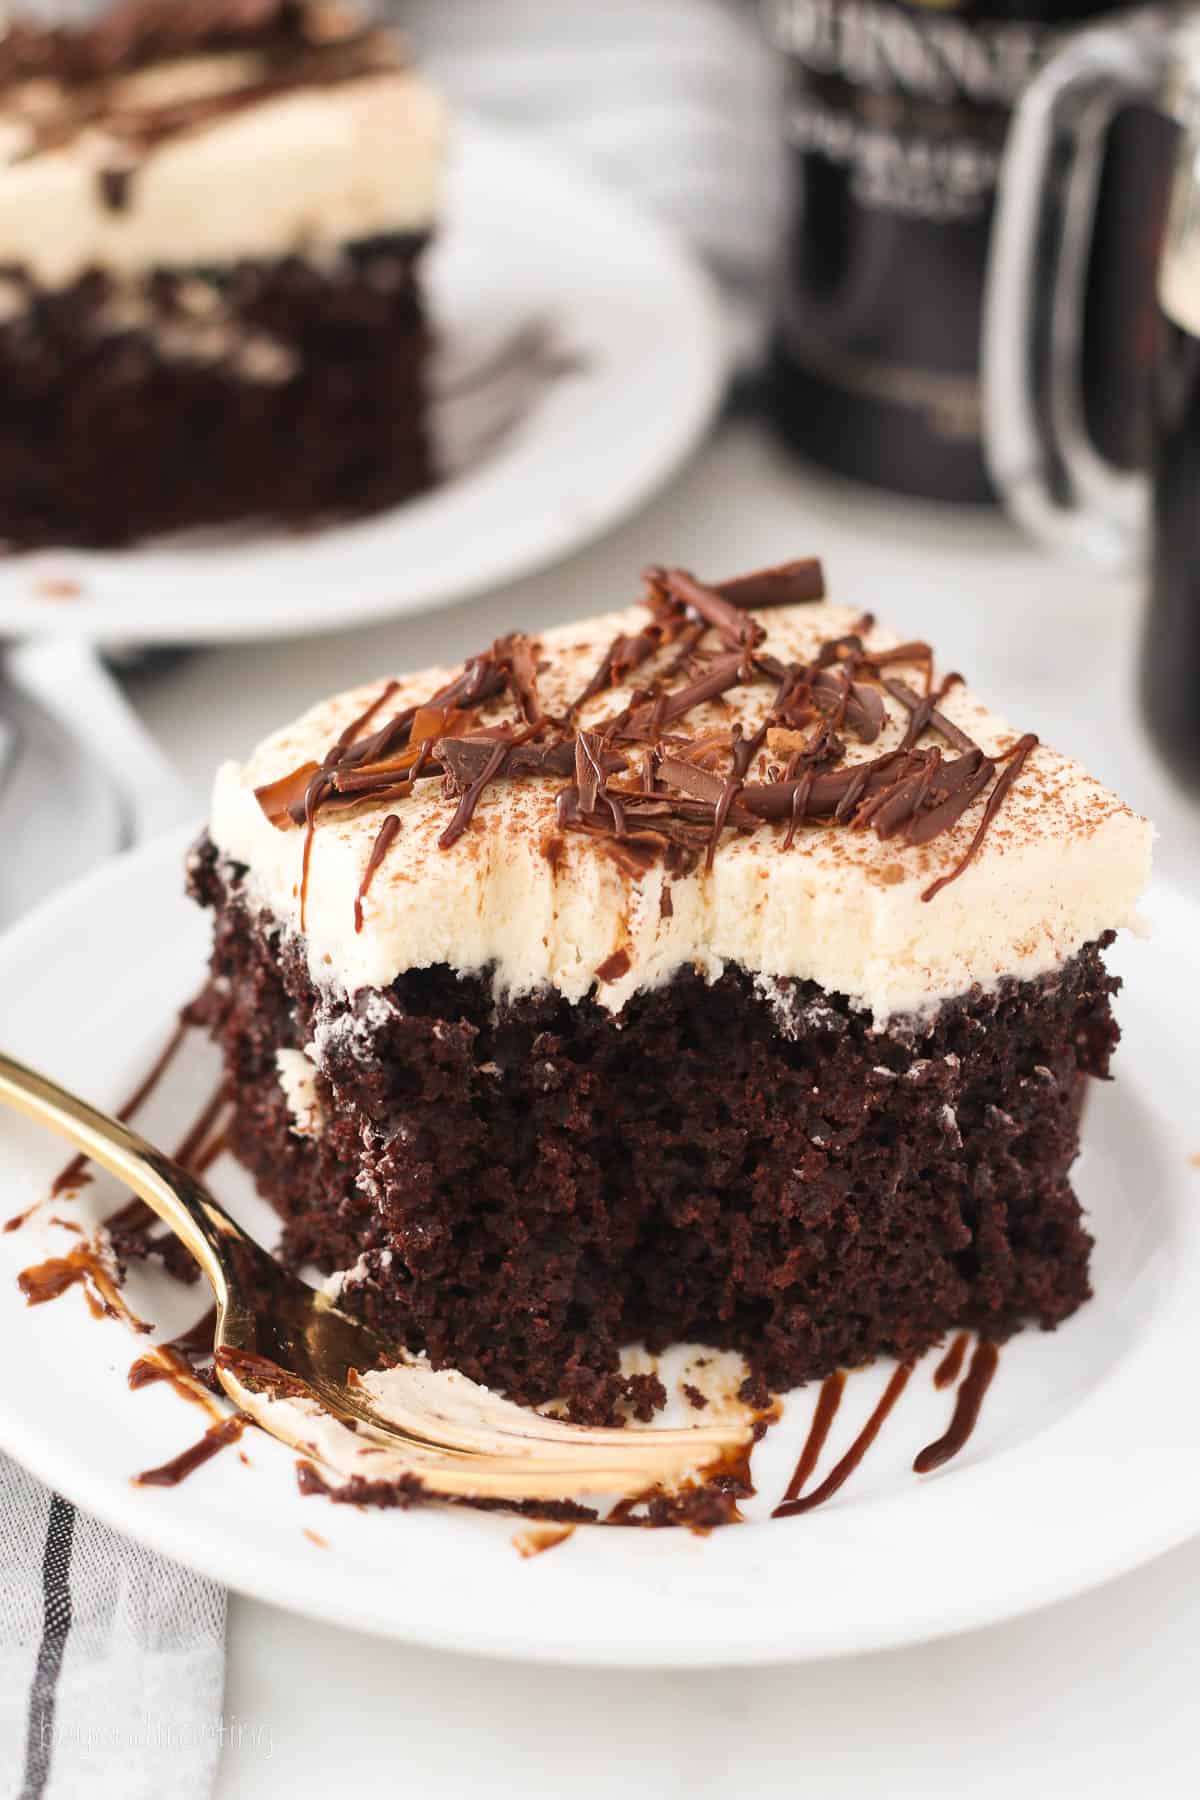 a square of chocolate cake topped with baileys Irish cream frosting on a white plate with a fork.